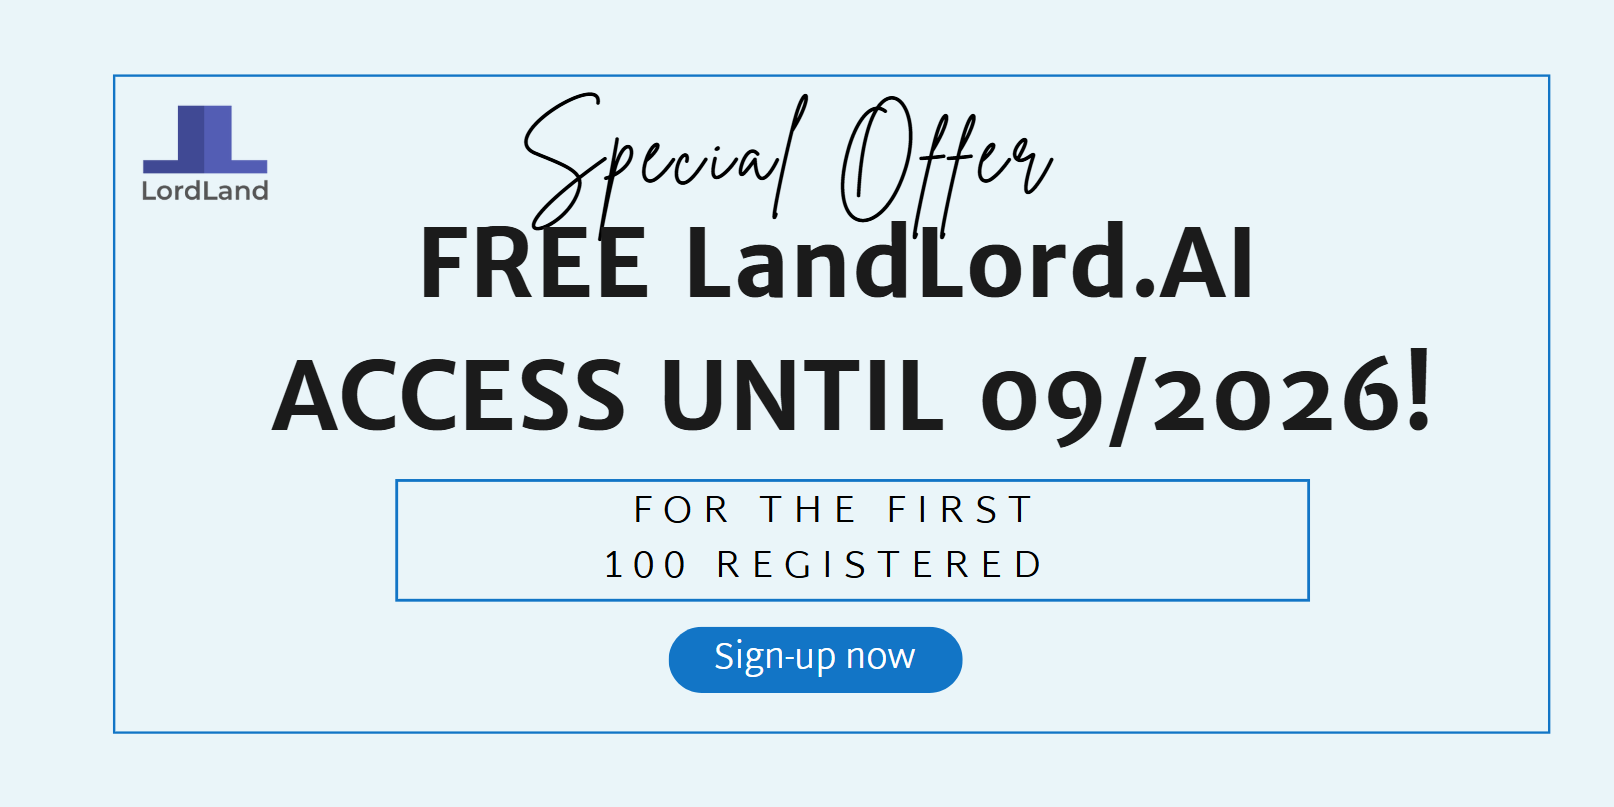 LordLand.AI promo: for first 100 sign-ups free until September 2026